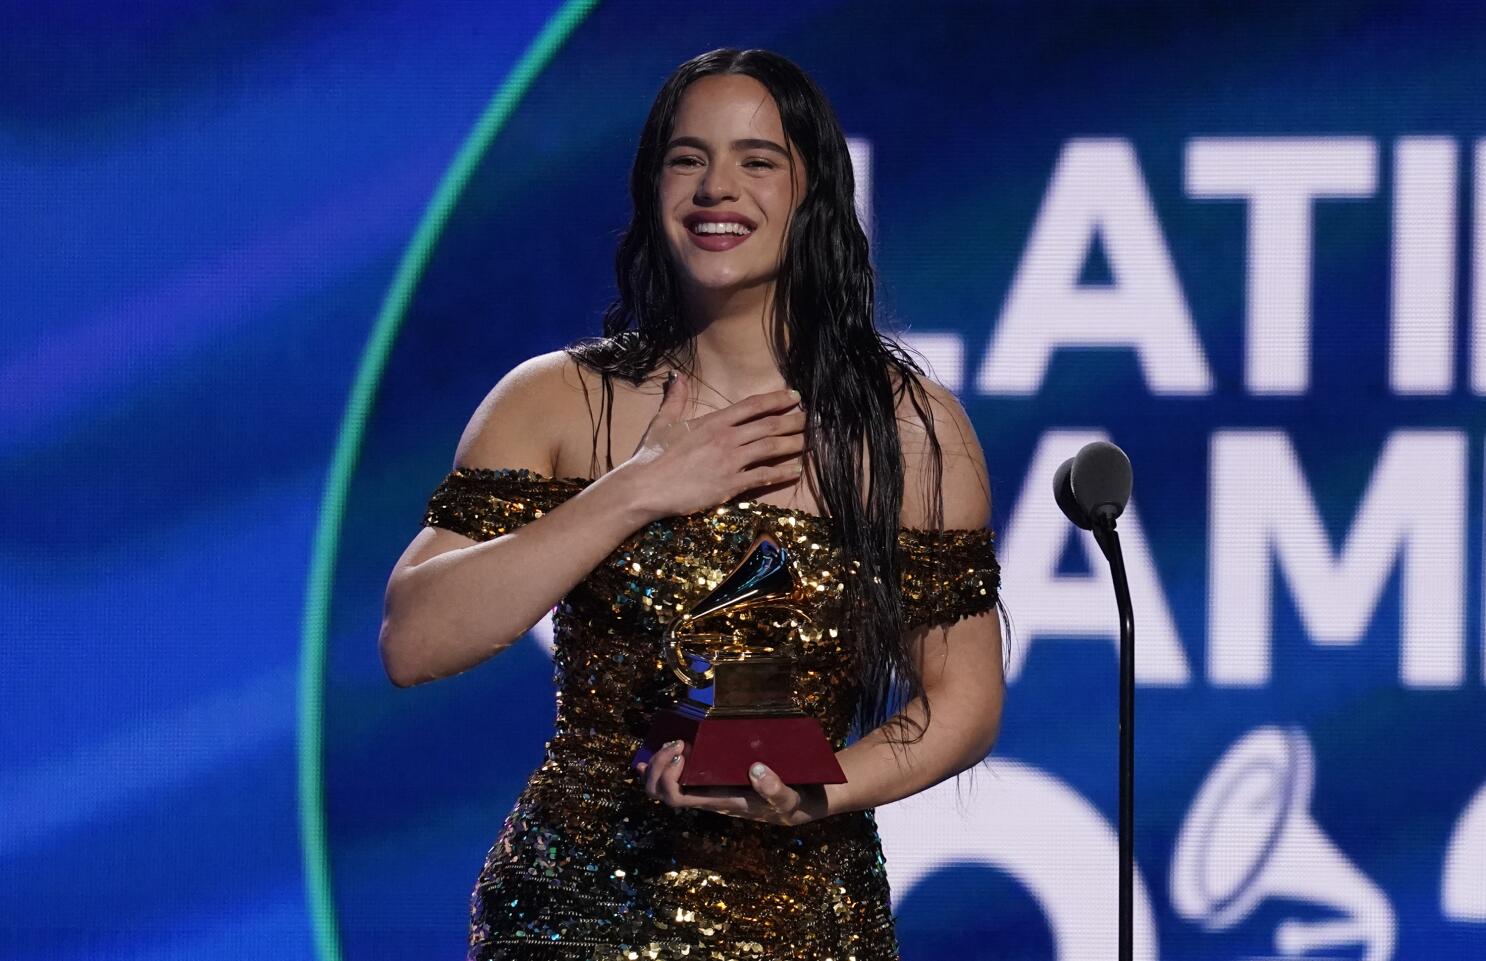 How to Watch the 2023 Latin Grammys Live for Free